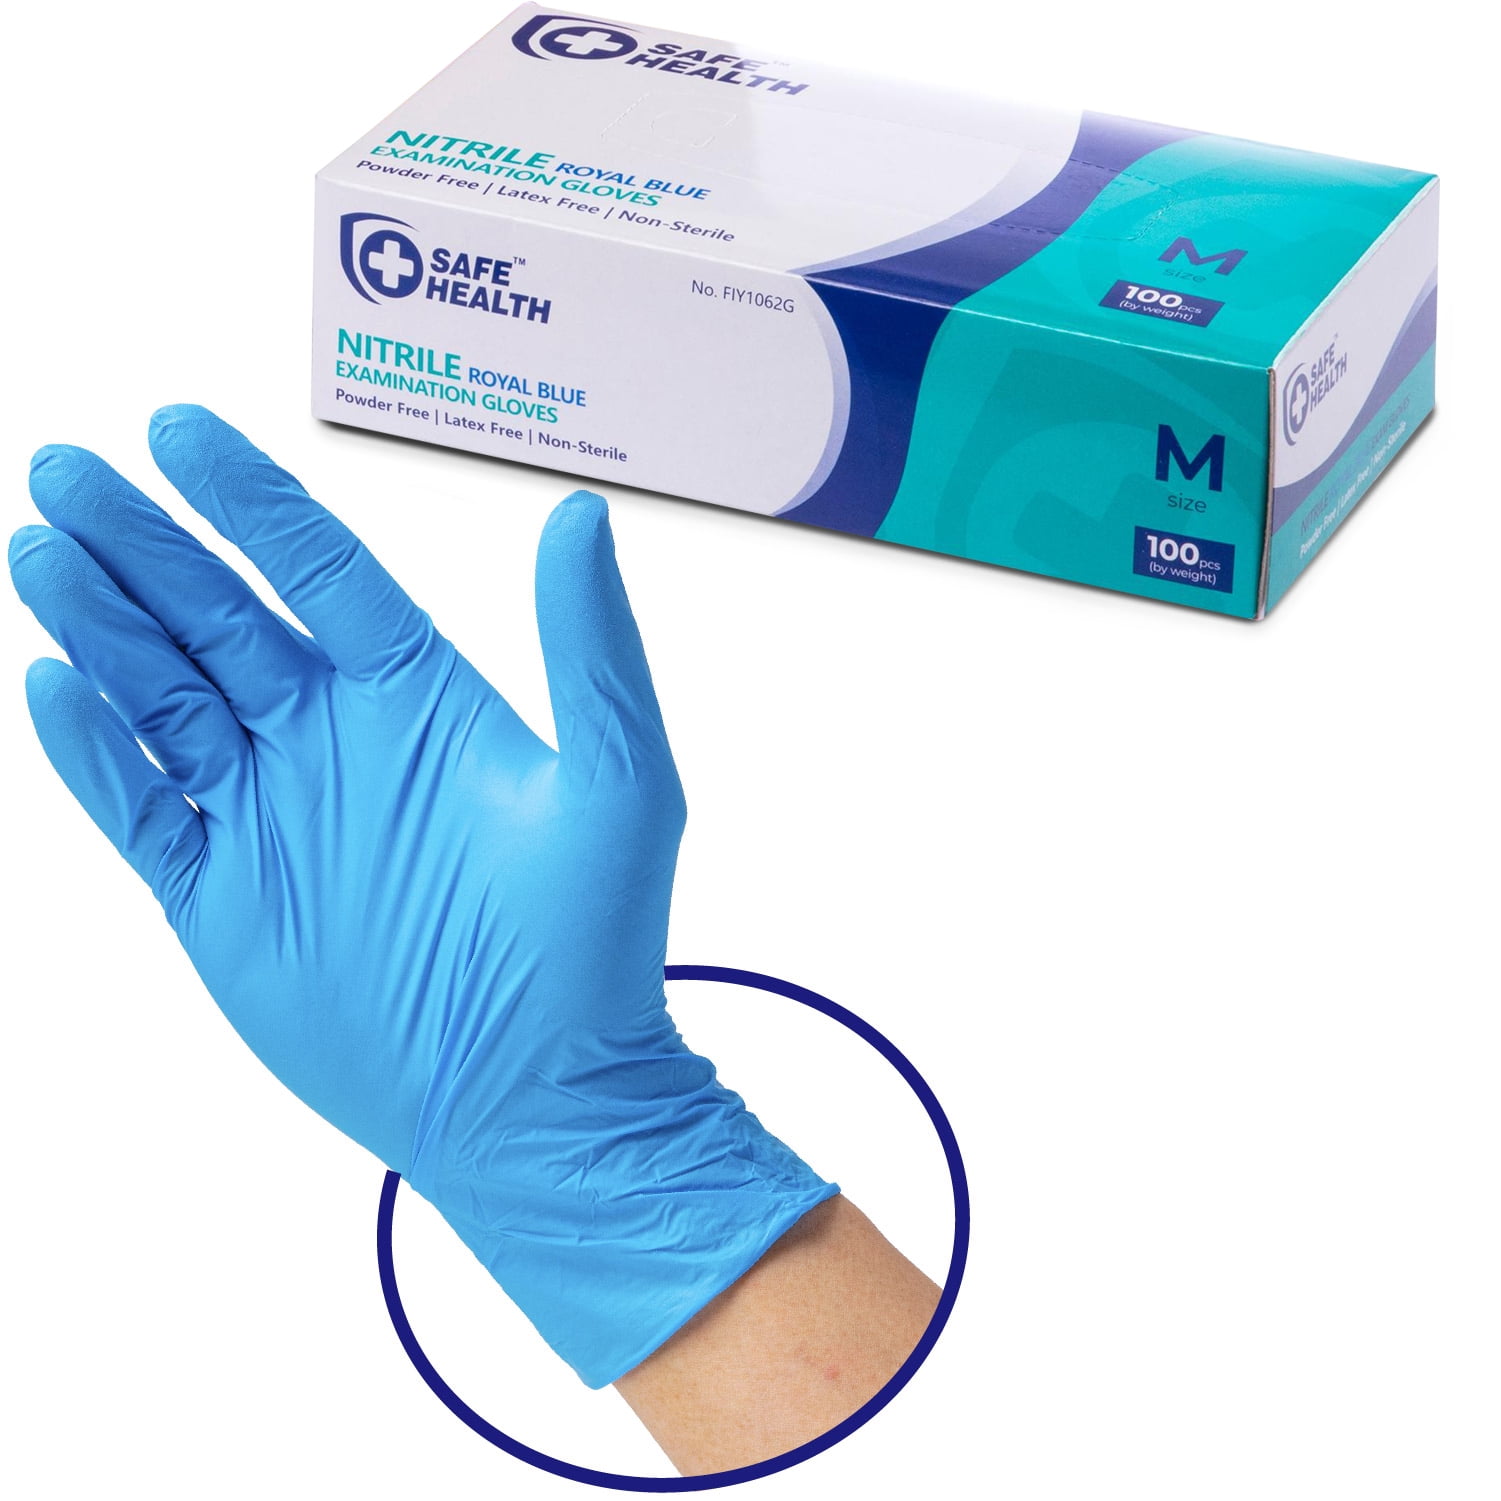 Free of Latex-Powder SAFE HEALTH Nitrile Blue Disposable Gloves Bakery-Food-Salon-Delivery-Cleaning 3.5 Mil 